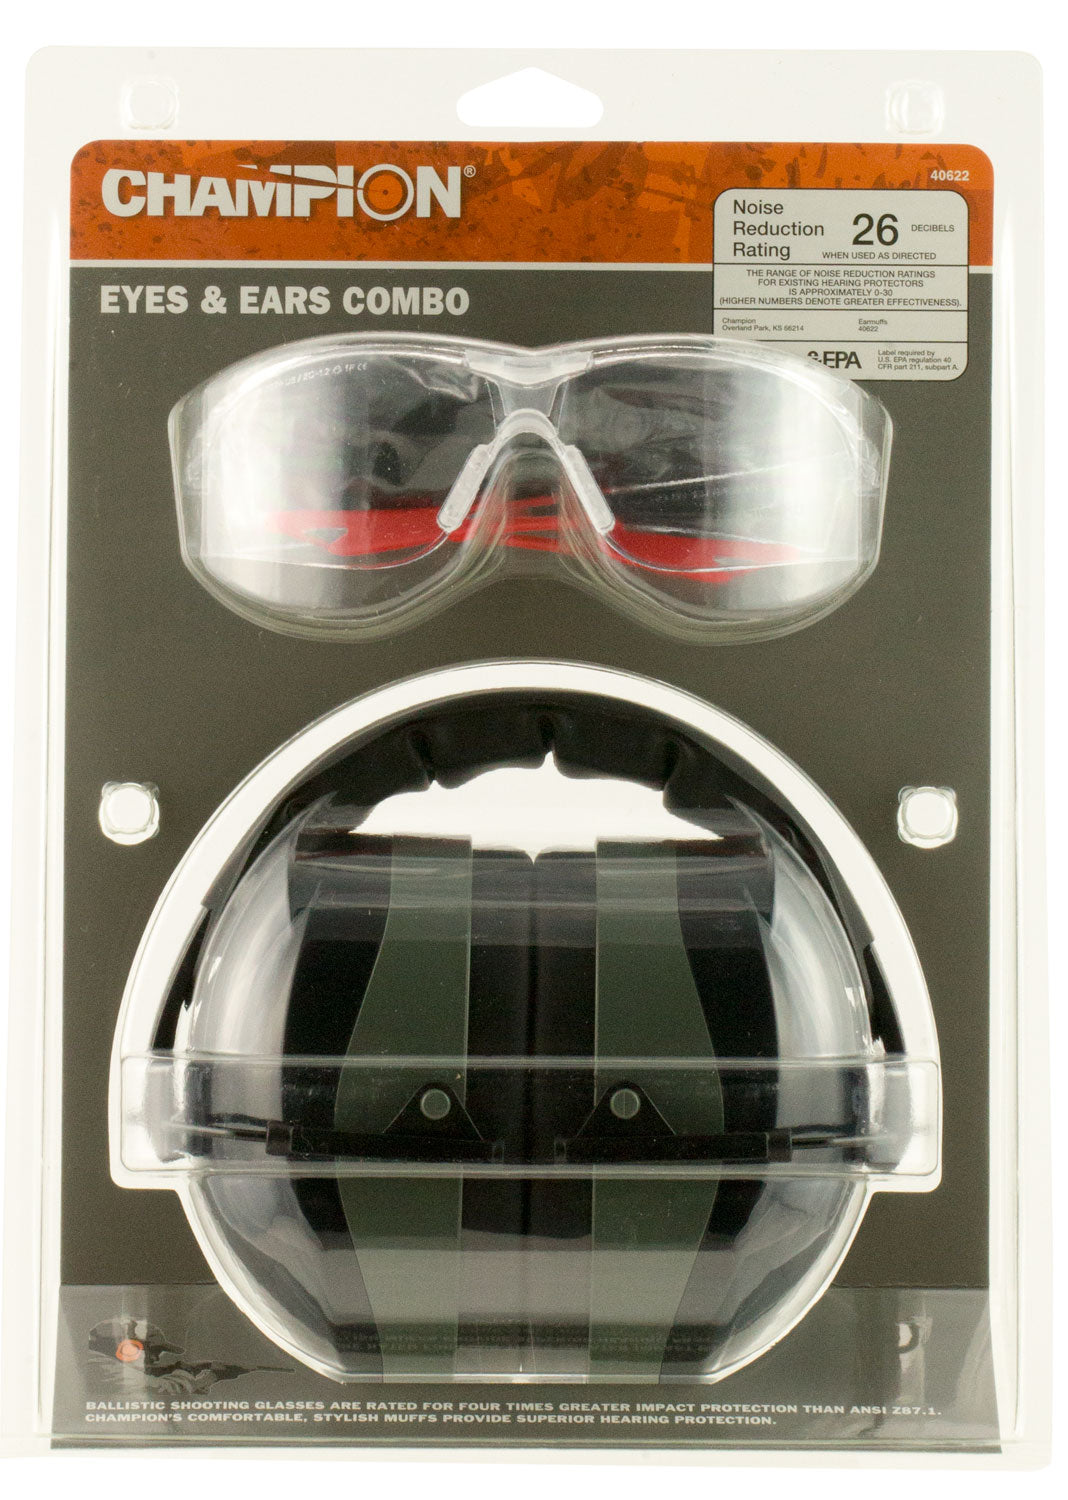 Champion Targets 40622 Eyes & Ears Combo 26 DB Over The Head Passive Muff & Shooting Glasses Black/Gray